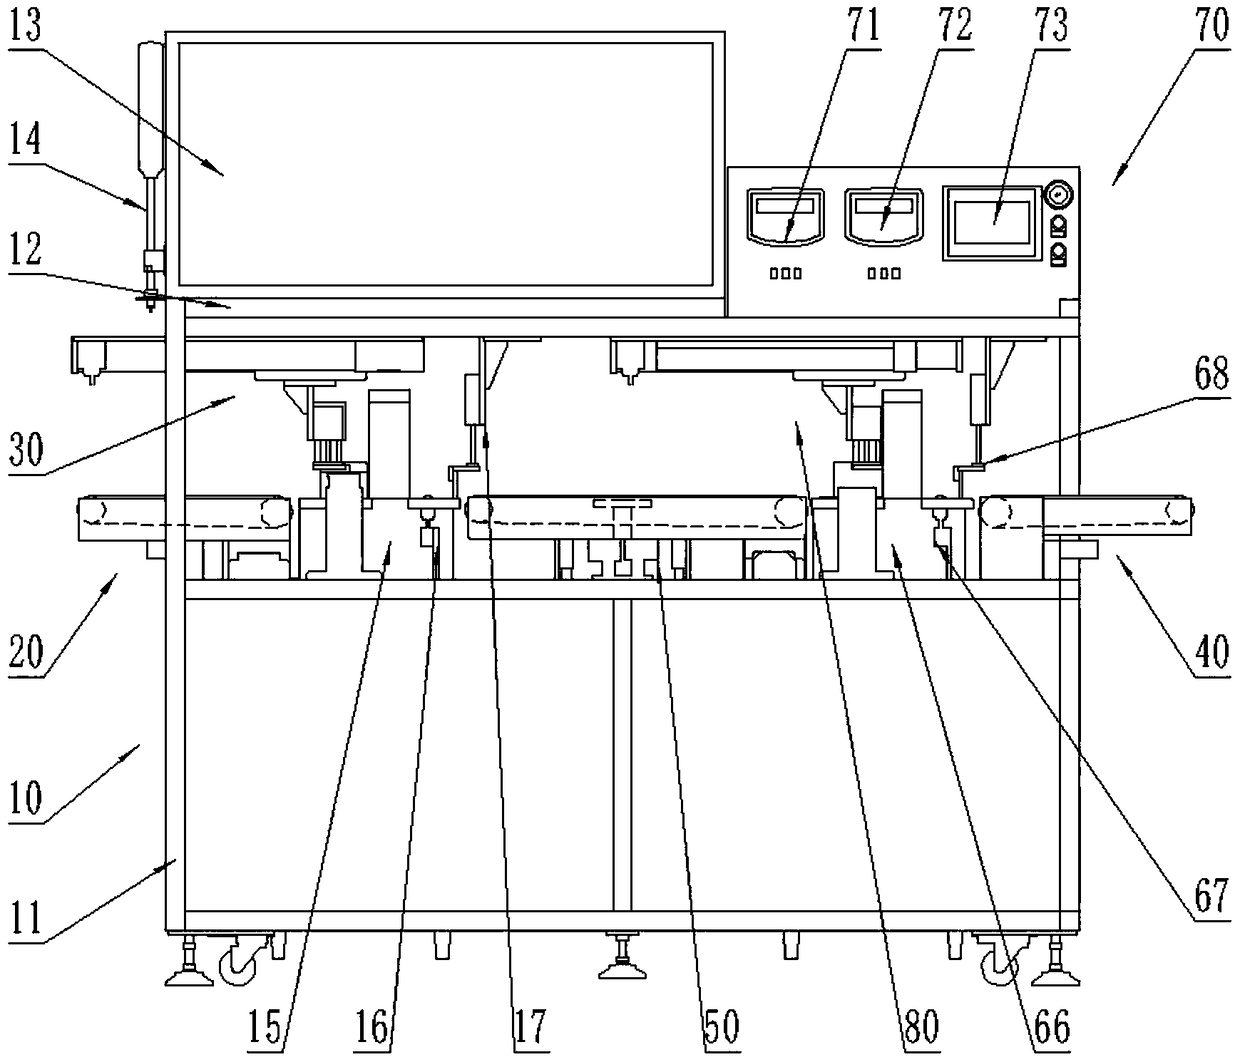 Automatic cross-shaped strapping machine for envelopes and cards